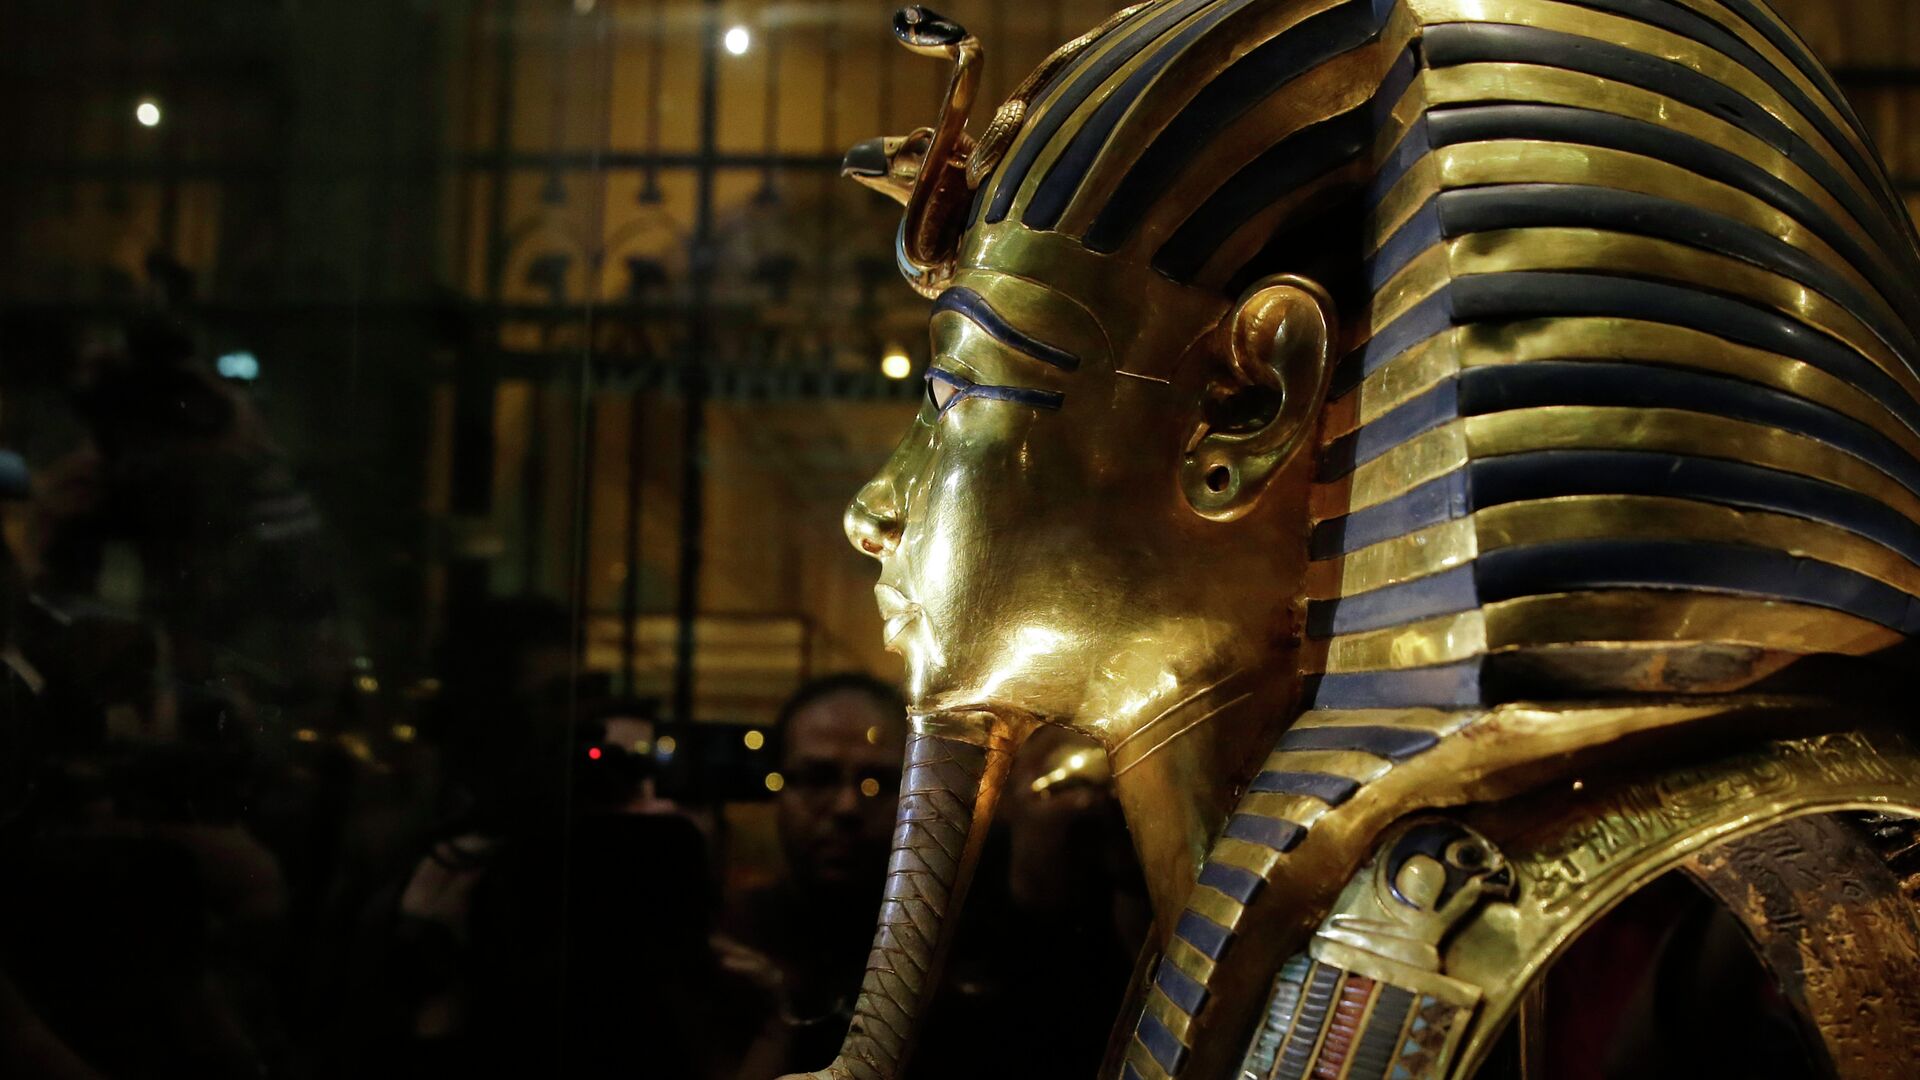 The gold mask of King Tutankhamun is seen in a glass case during a press tour, in the Egyptian Museum near Tahrir Square, Cairo, Egypt, Saturday, Jan. 24, 2015 - Sputnik International, 1920, 28.06.2021